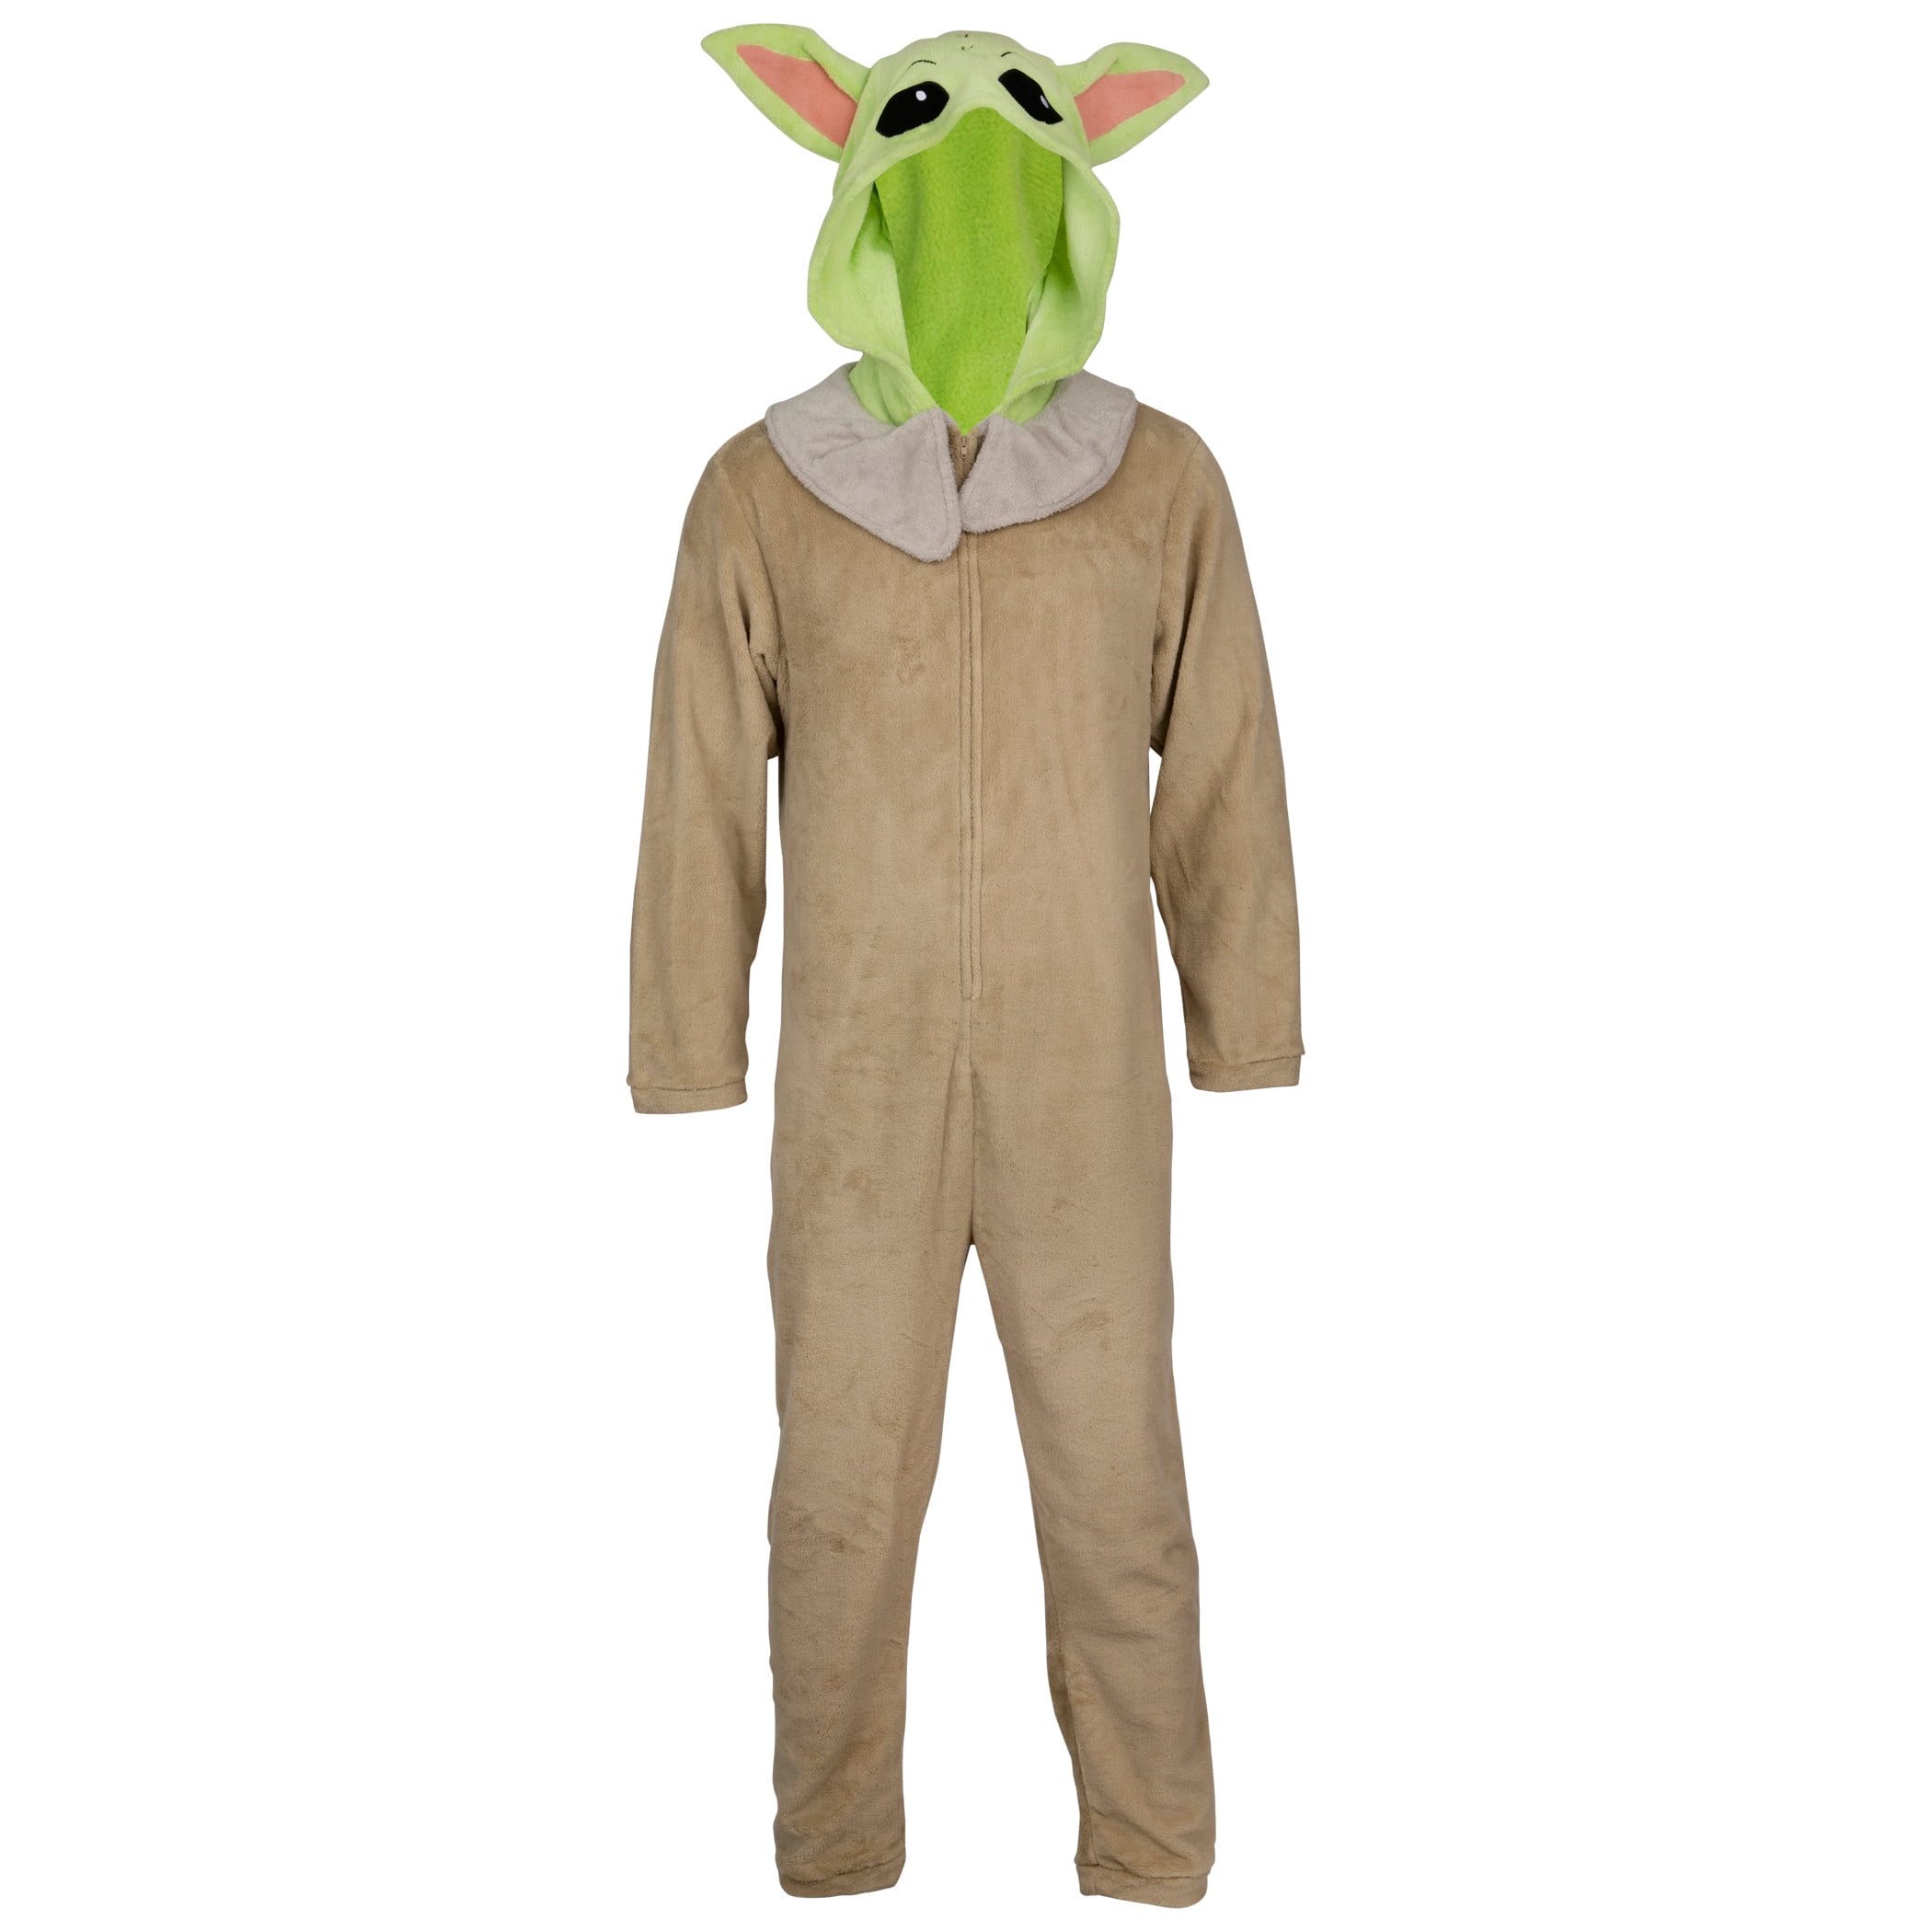 STAR WARS Baby Boys and Toddler Boys Baby Yoda Costume – Long-Sleeve Hooded  Jumpsuit – Baby Yoda Halloween Costume